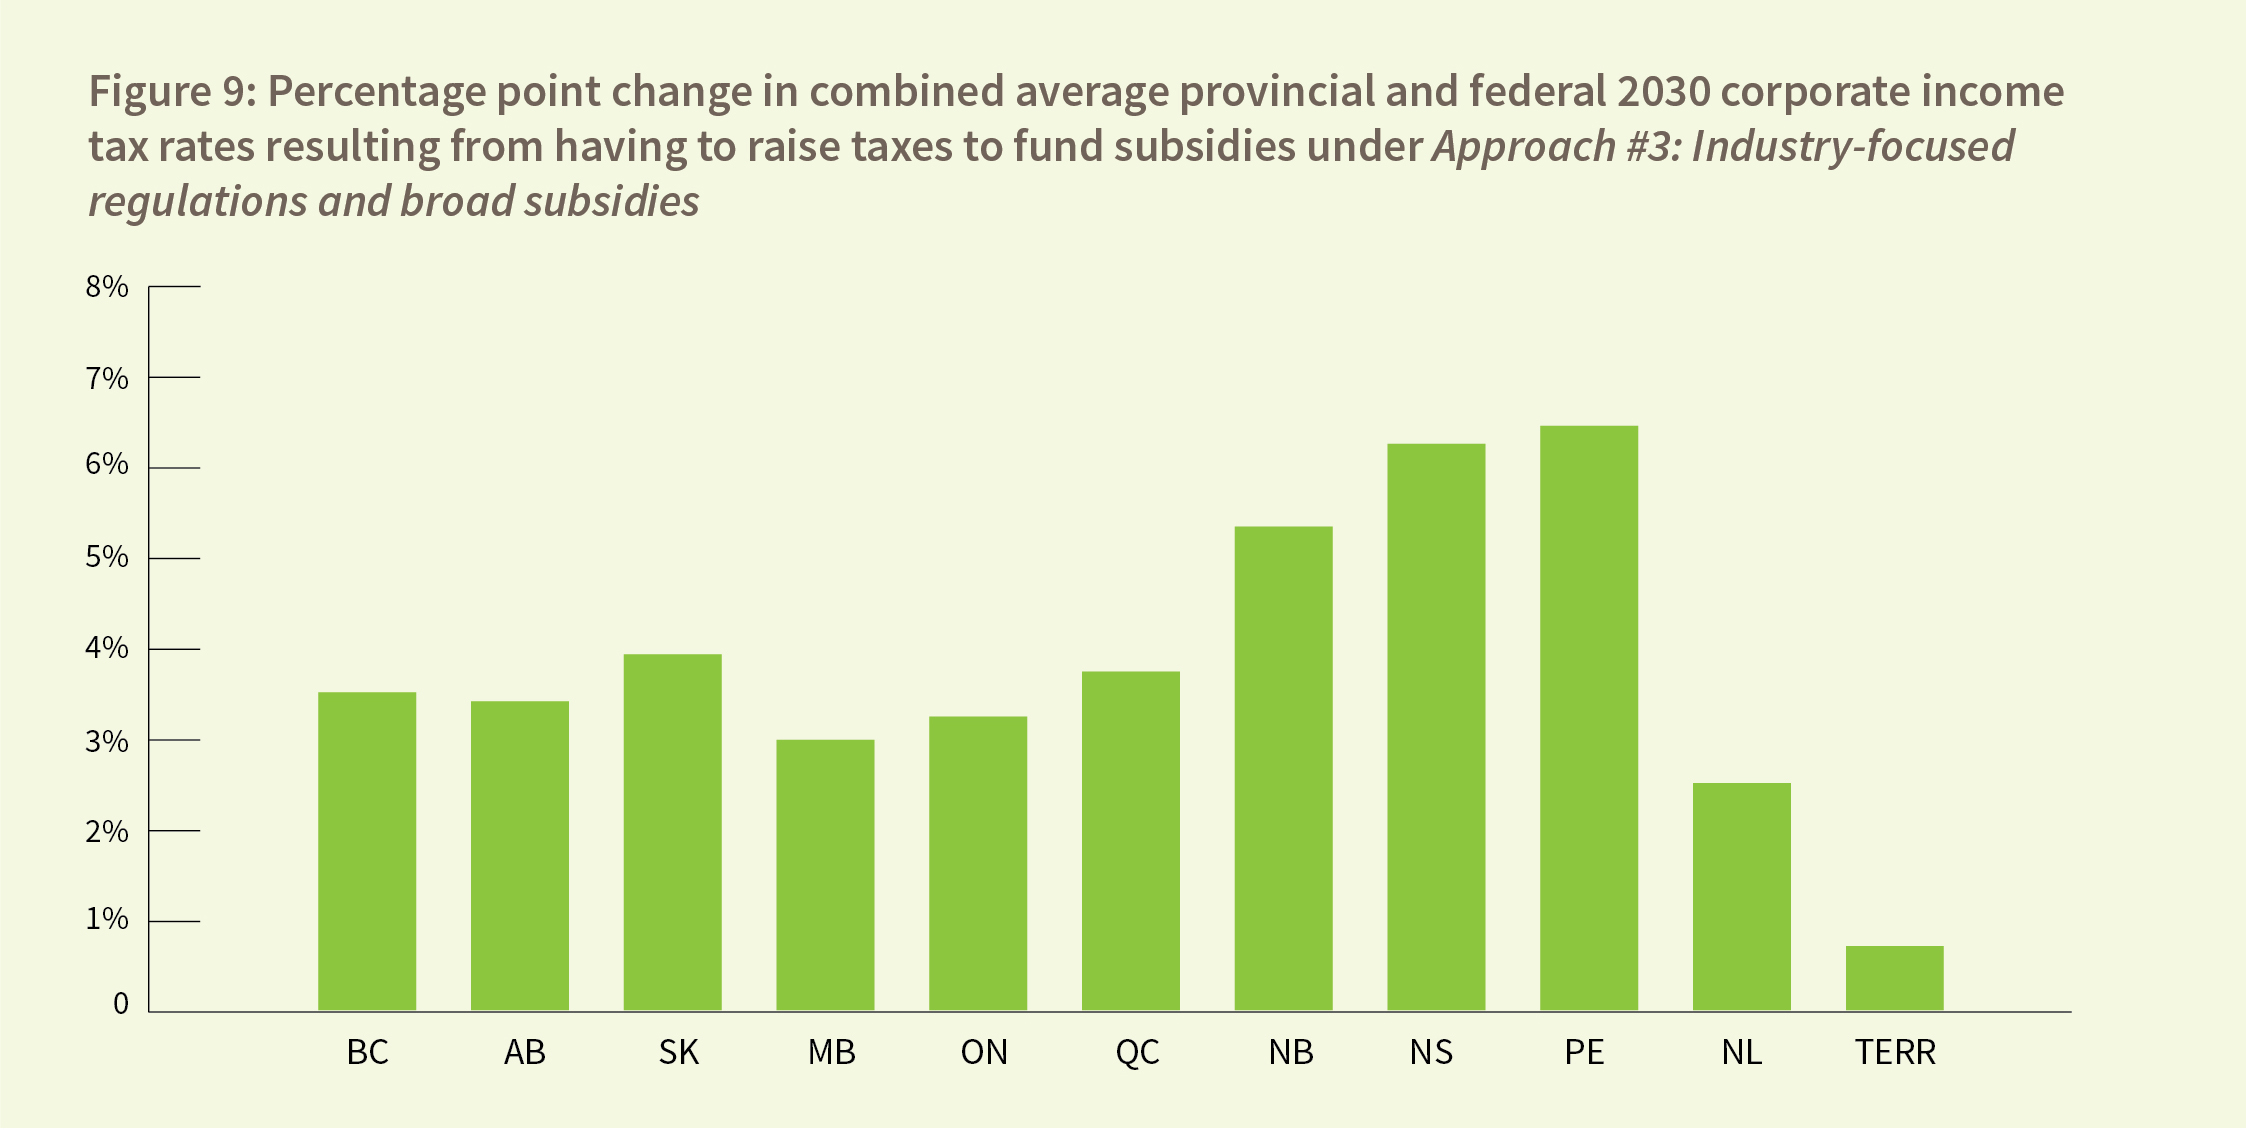 Figure 9: Percentage point change in combined average provincial and federal 2030 corporate income tax rates resulting from having to raise taxes to fund subsidies under Approach #3: Industry-focused regulations and broad subsidies